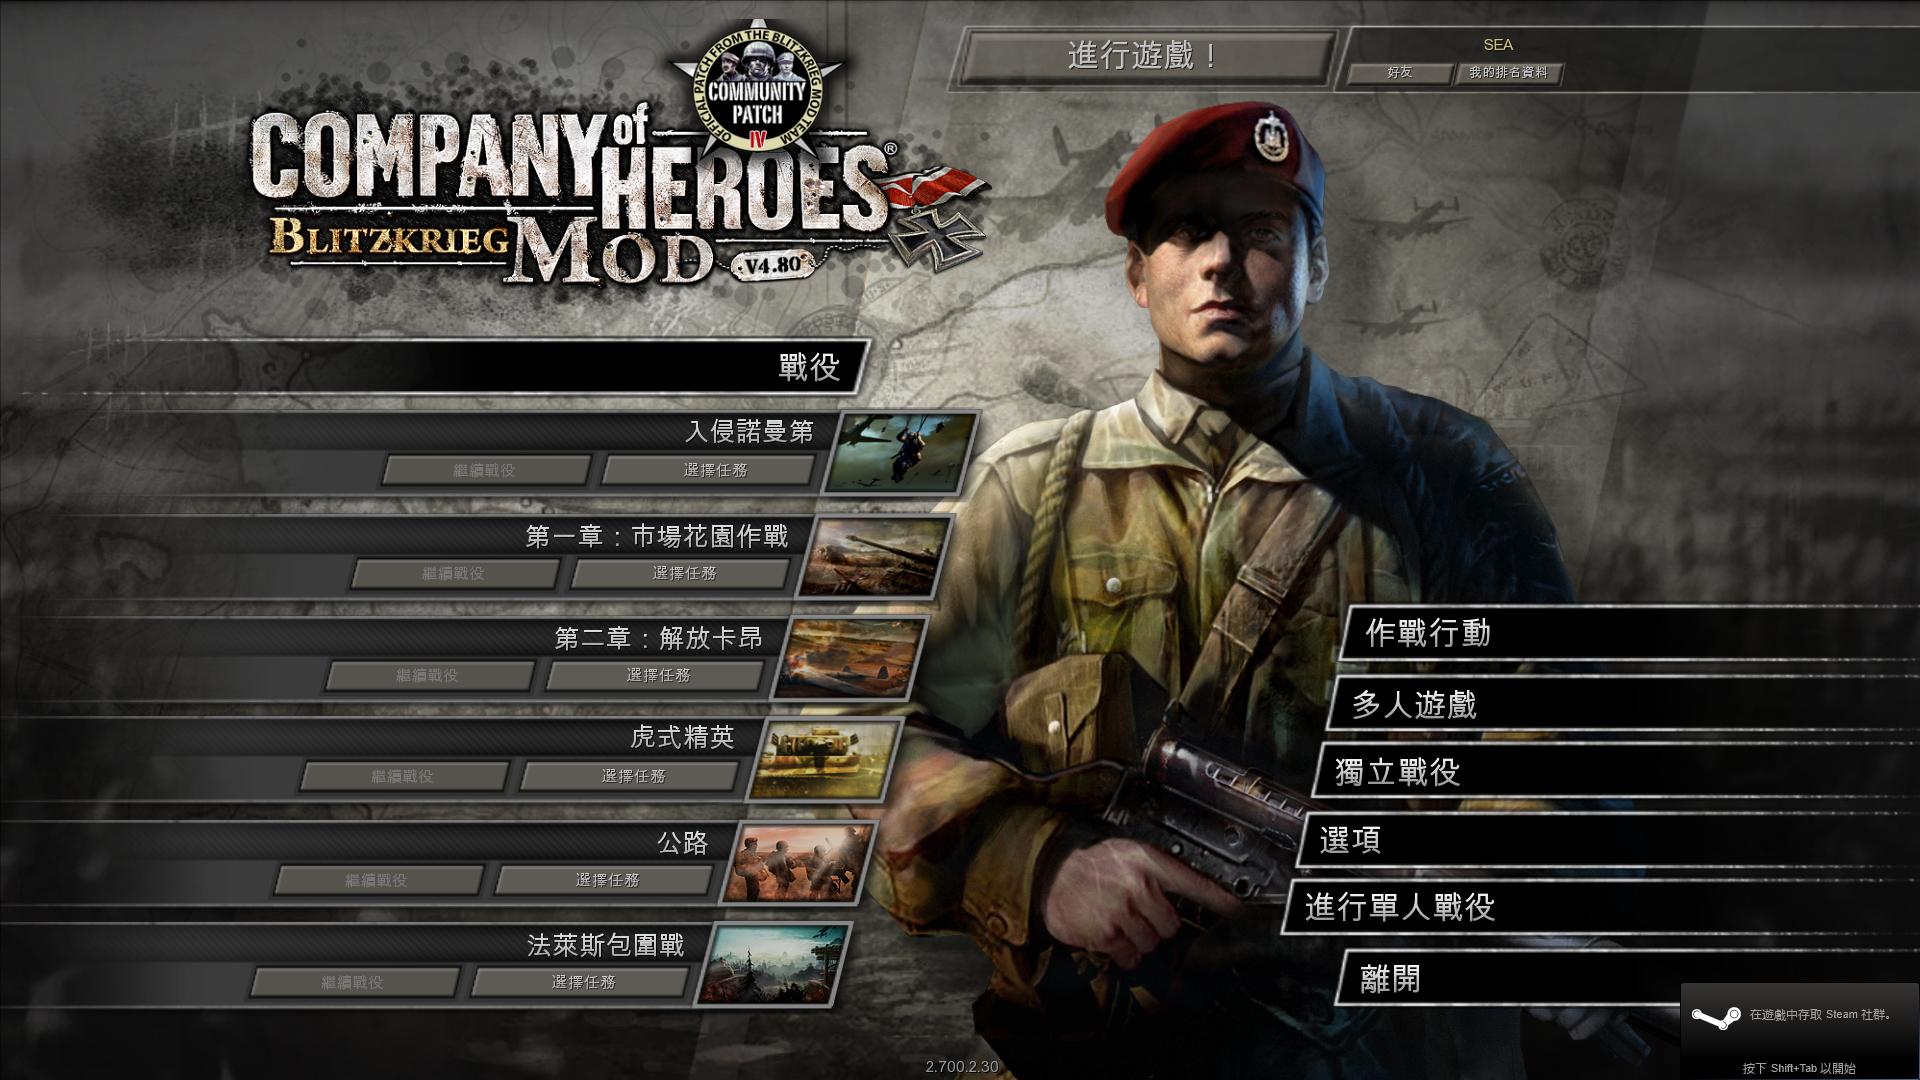 Account operation. Company of Heroes Tales of Valor. Company of Heroes opposing Fronts. Company of Heroes схватка. Company of Heroes Tales of Valor opposing Fronts.